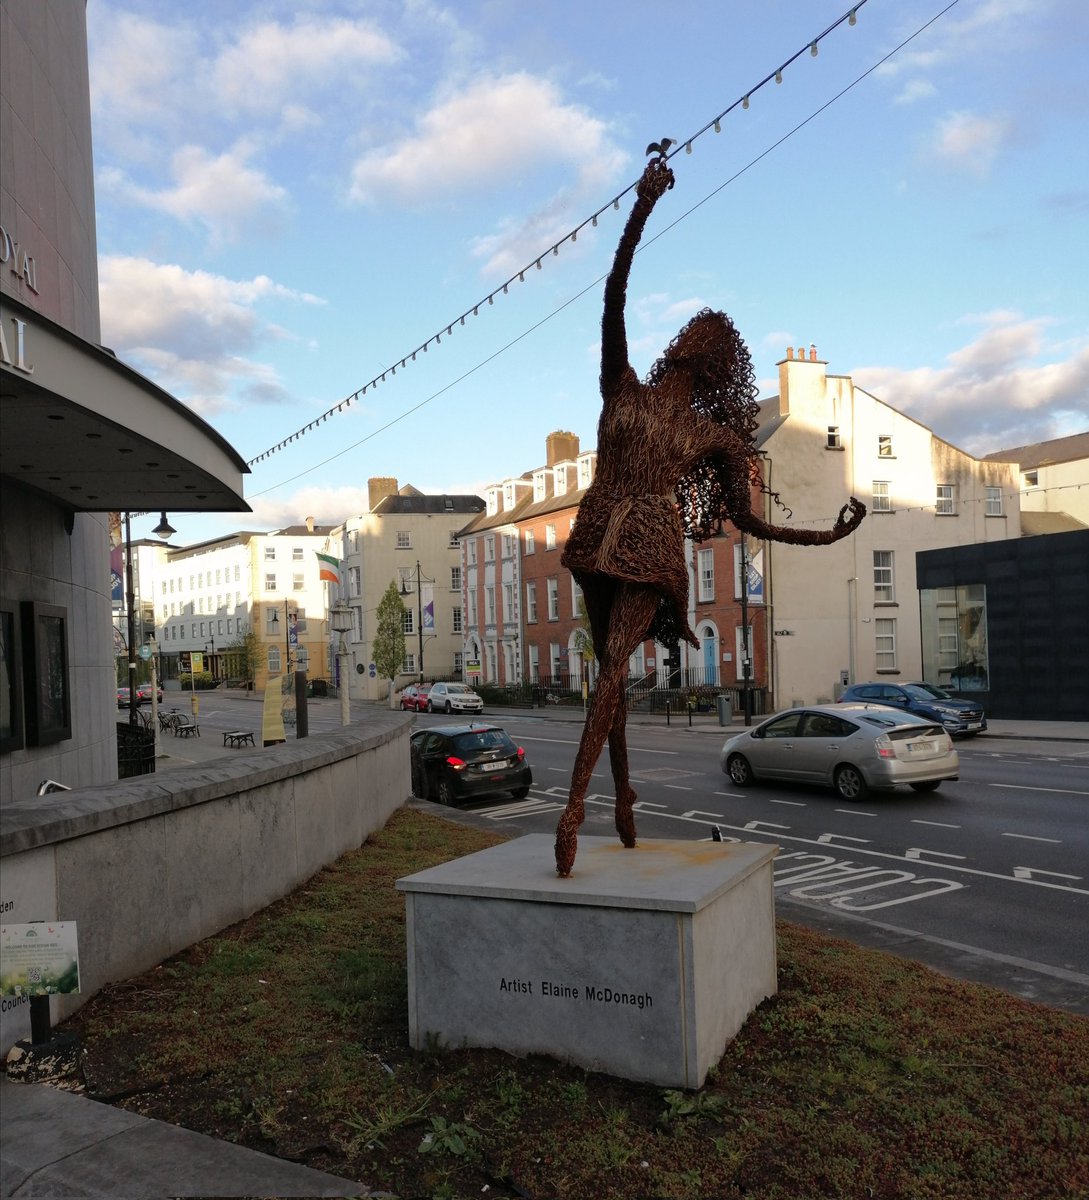 Dance sculpture outside Theatre Royal, Waterford. I love this part of the city 💙. #sculpture #art #dance #theatre #theatreroyal #waterford